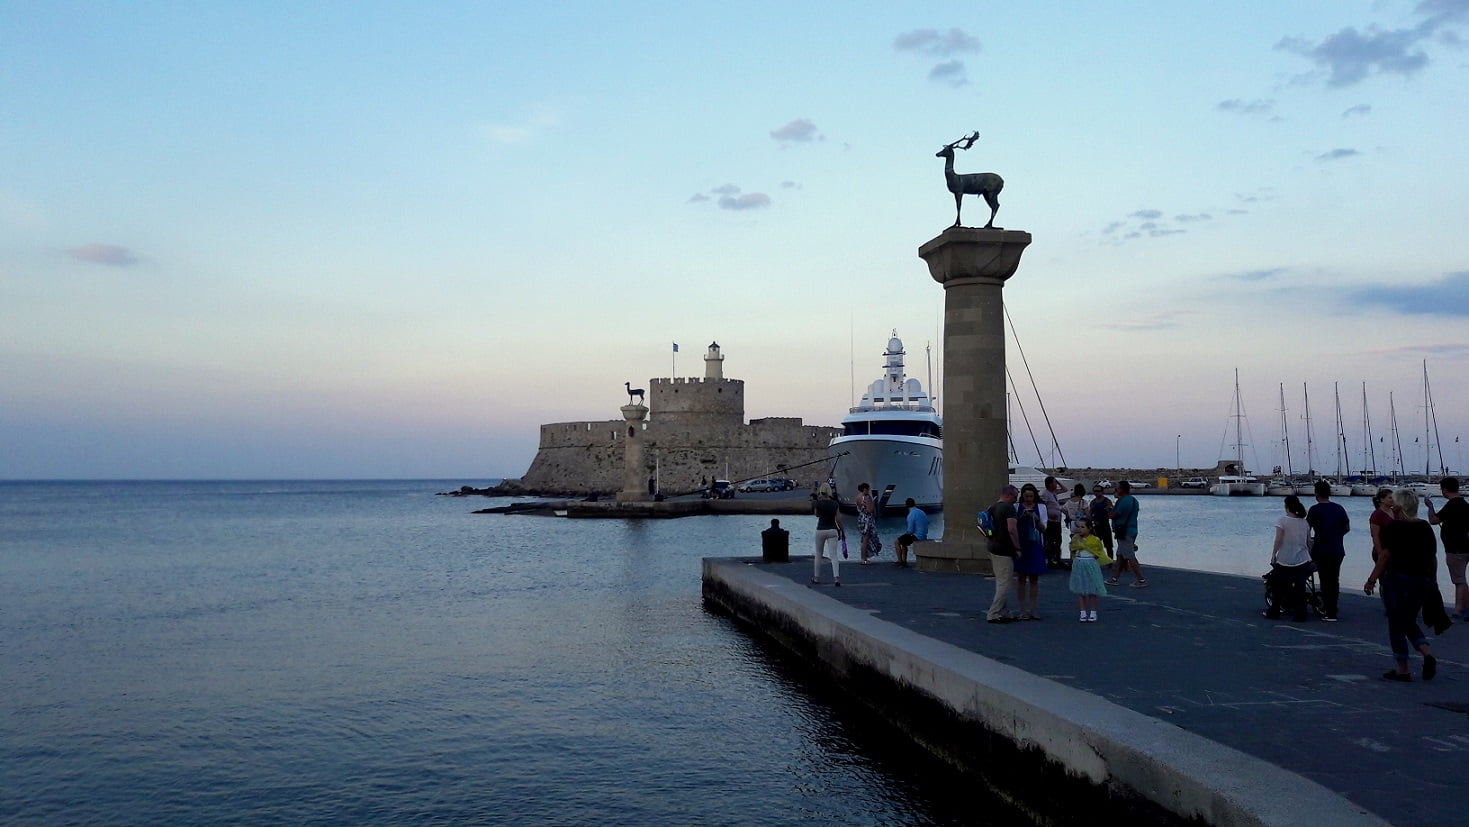 Rhodes Greece There Stood The Colossus 3 Glimpses Of The World